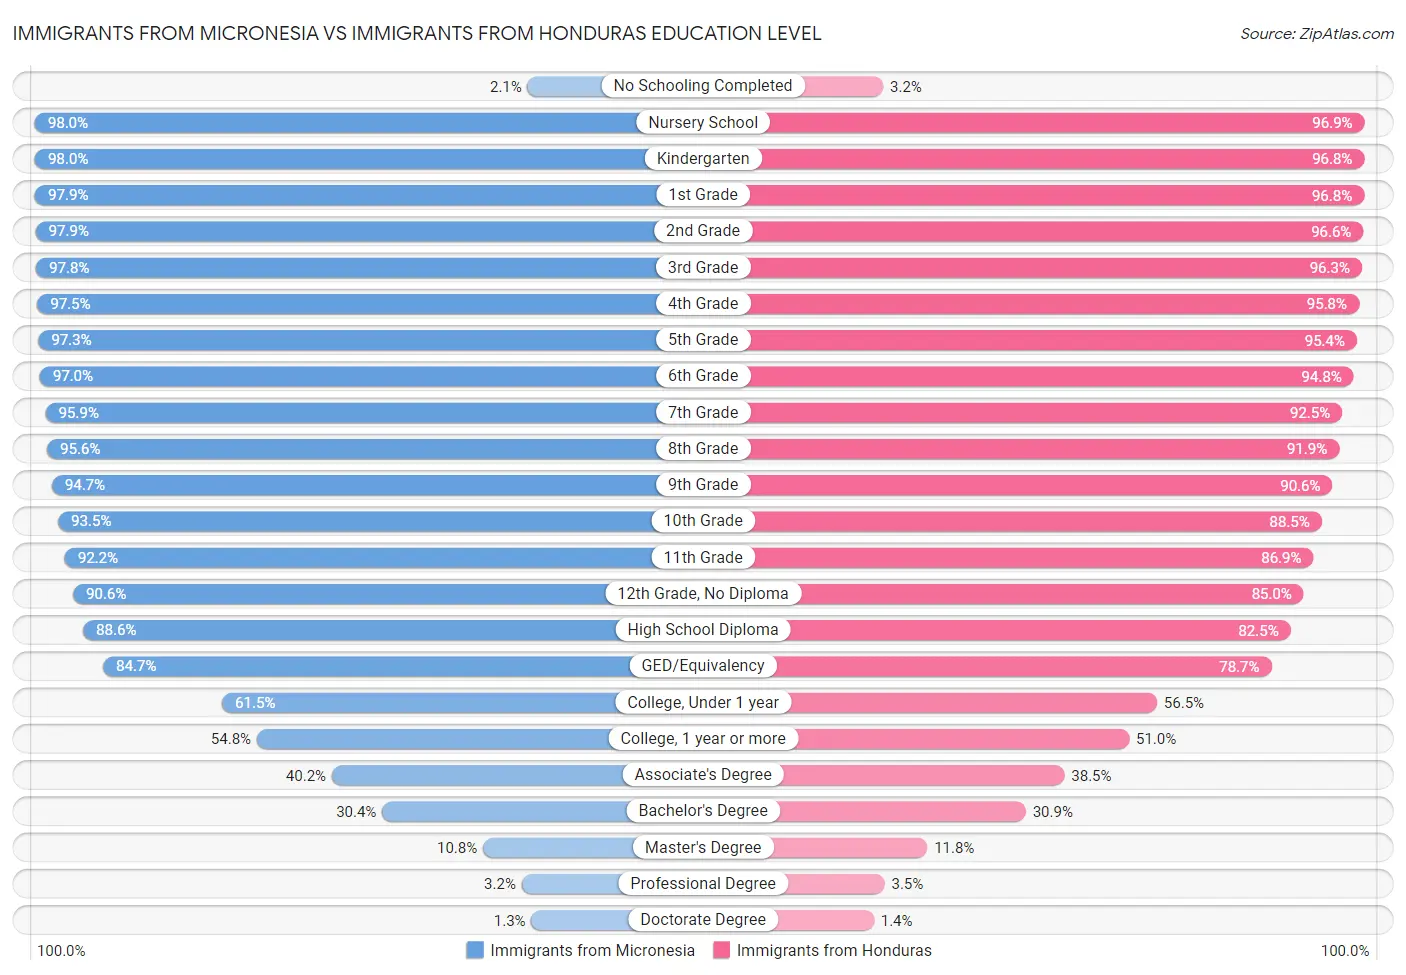 Immigrants from Micronesia vs Immigrants from Honduras Education Level